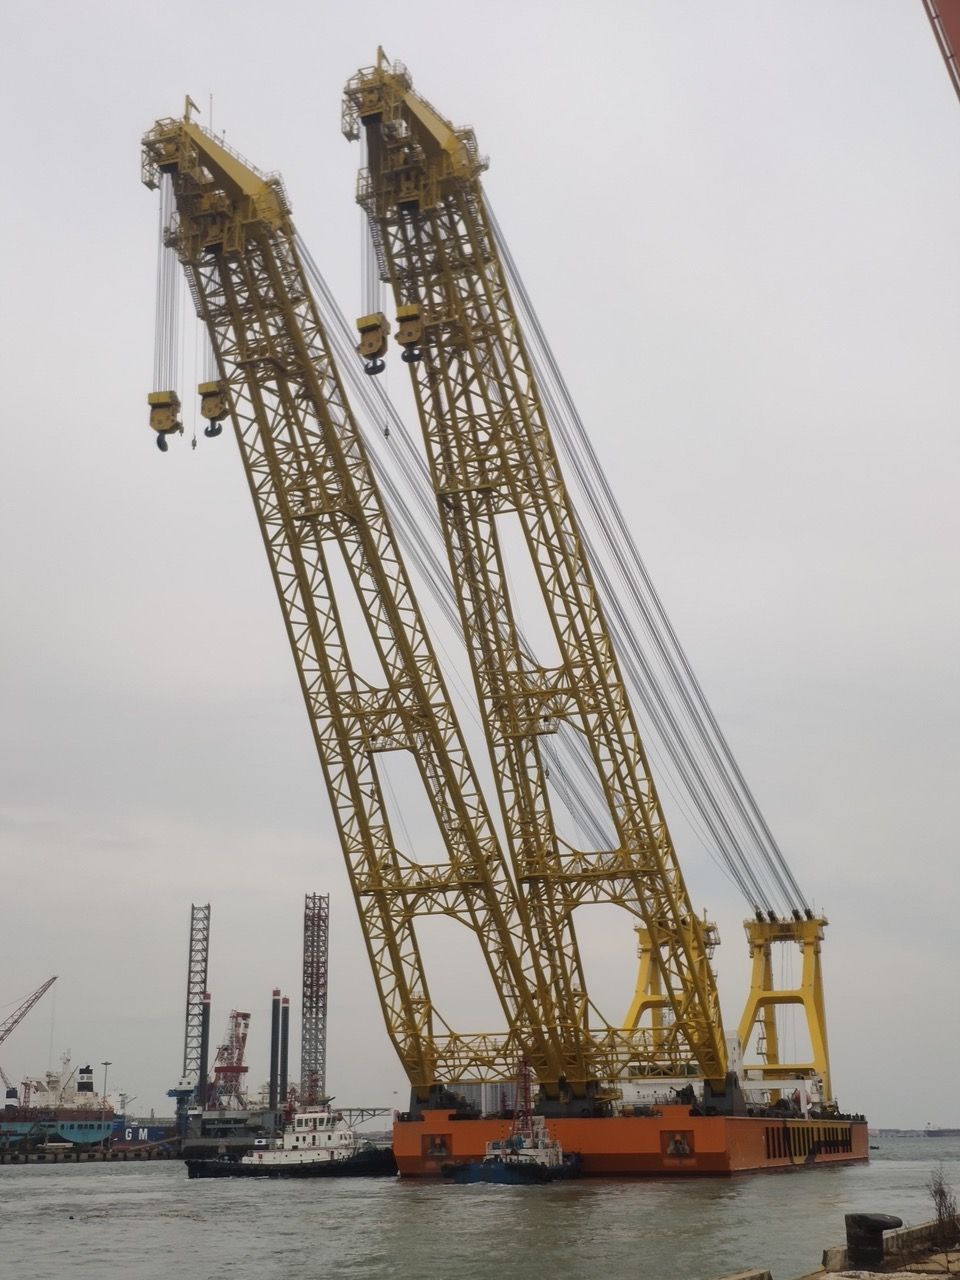 Each crane boom, which sit side-by-side at the front of the vessel, can lift 1,750 tonnes.